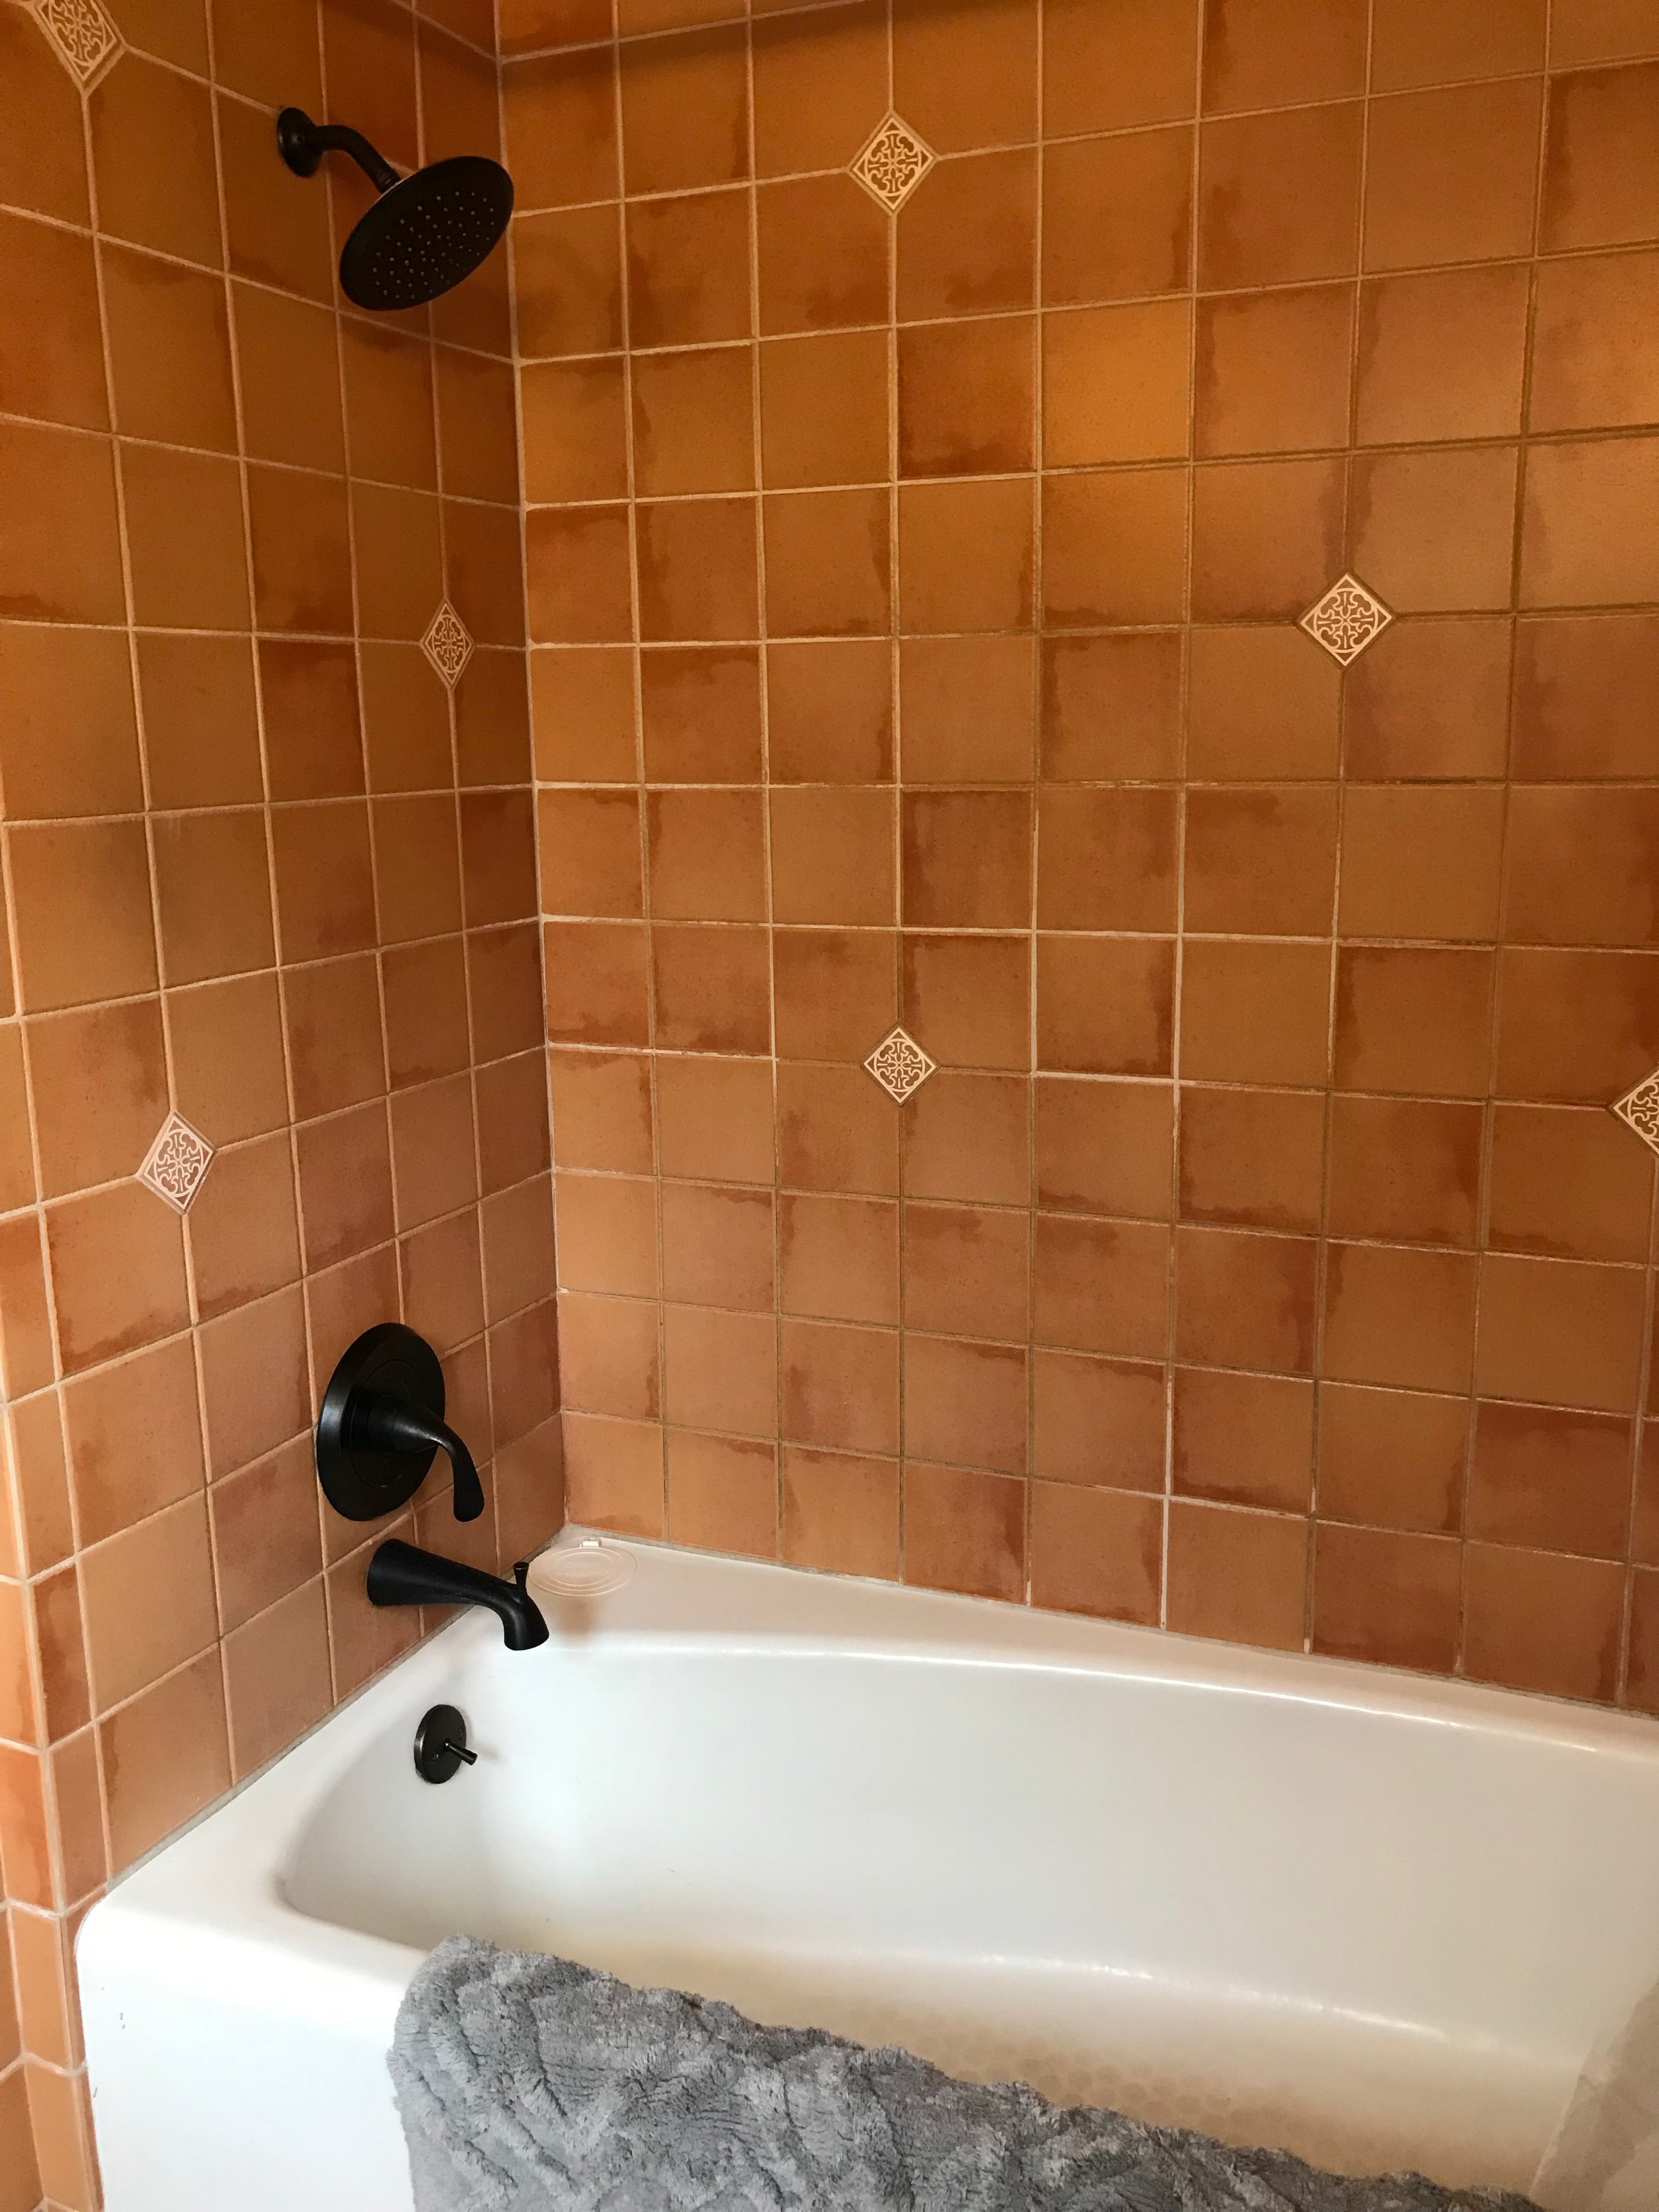 Full bath with tub and shower